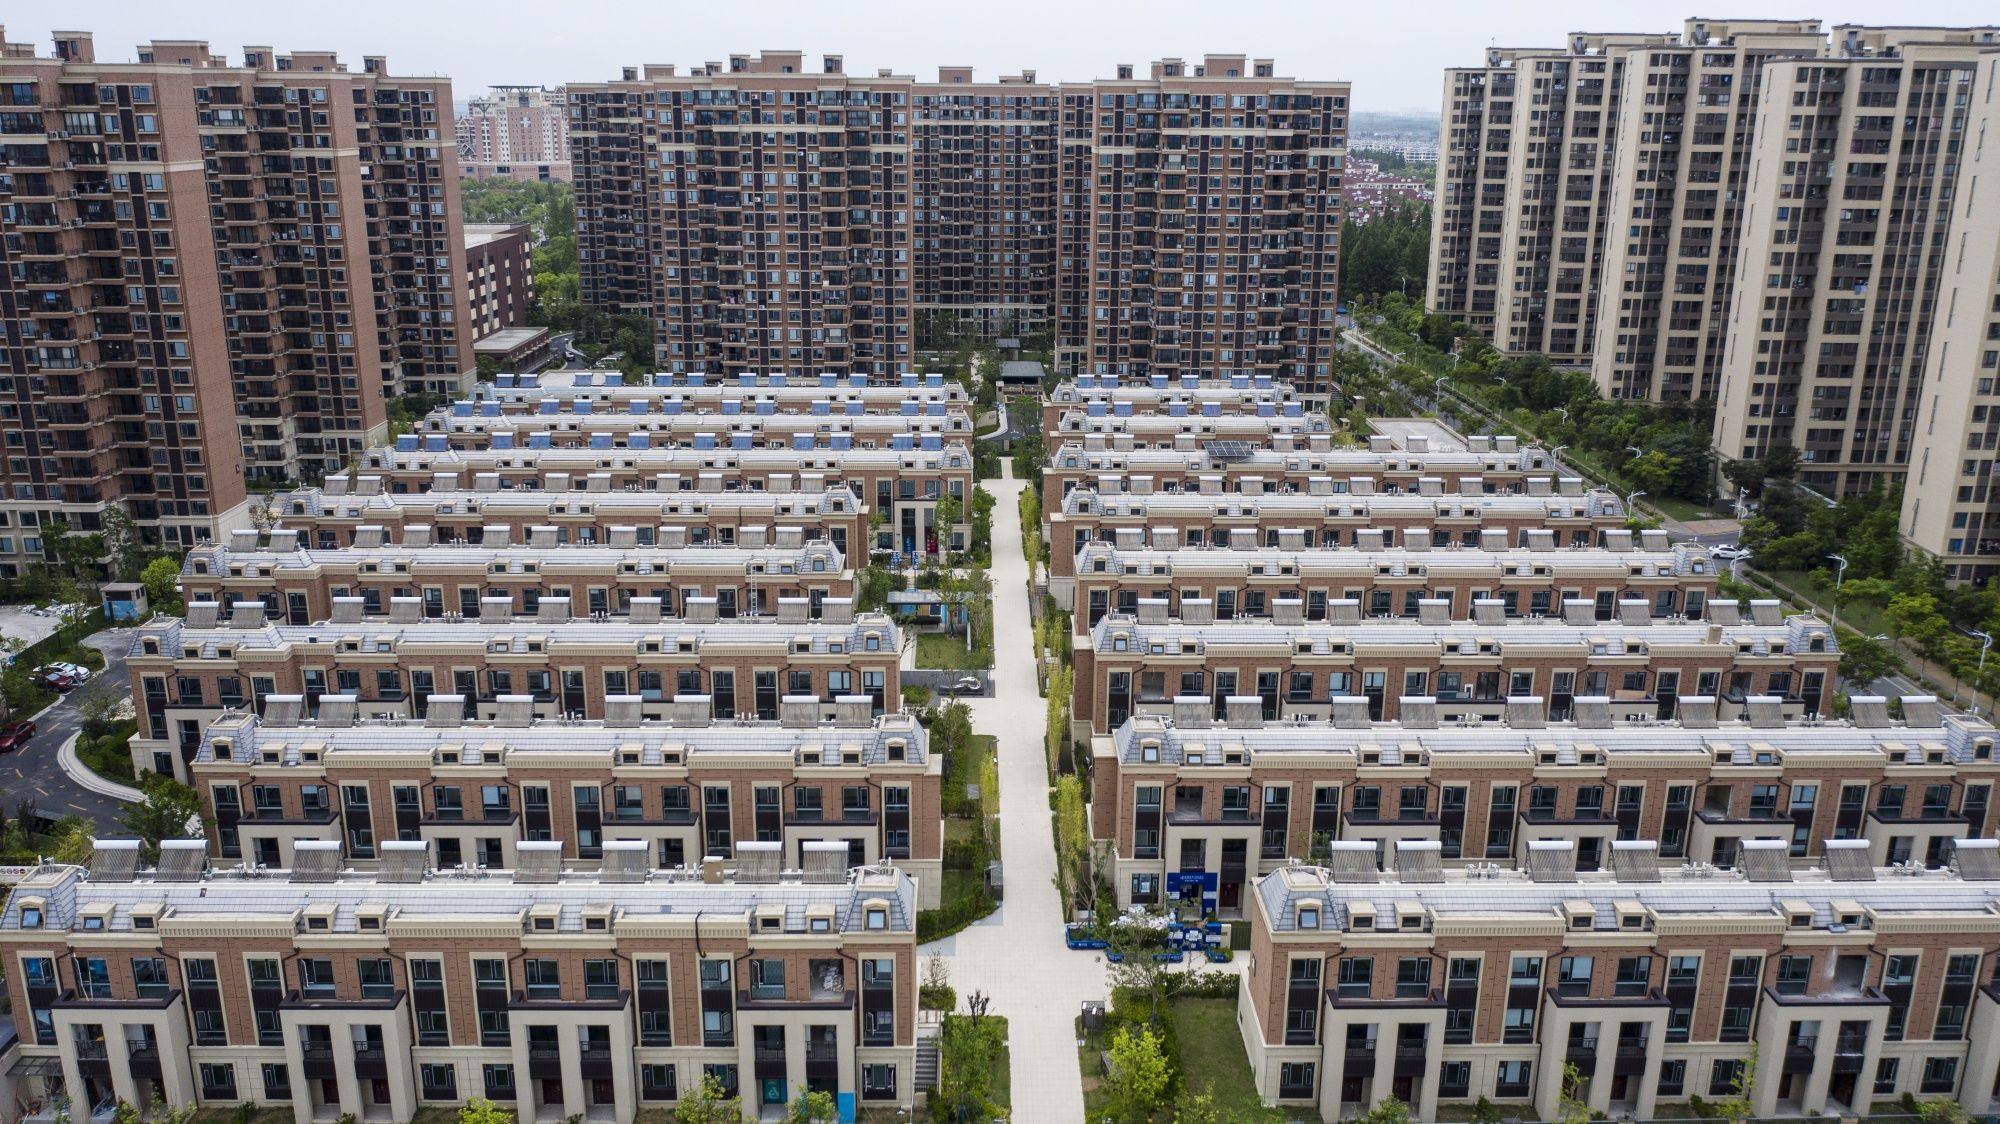 Country Garden Holdings Co.’s Fengming Haishang residential development in Shanghai, China, on Tuesday, July 12, 2022. Photo: Bloomberg